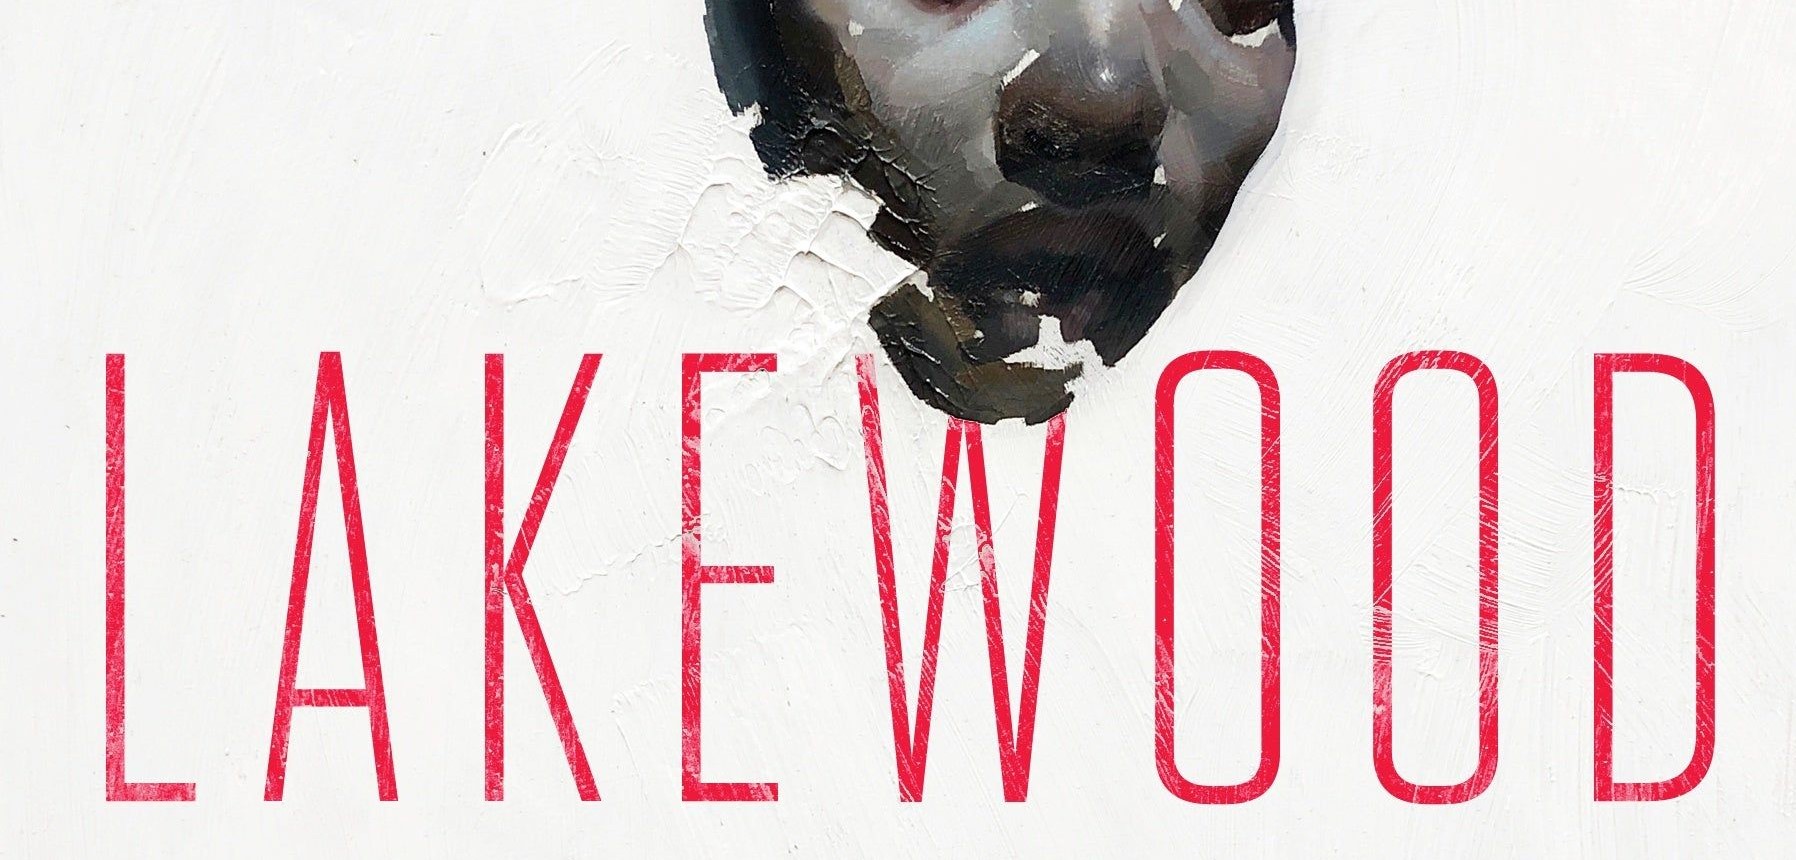 Book Cover for Lakewood by Megan Giddings